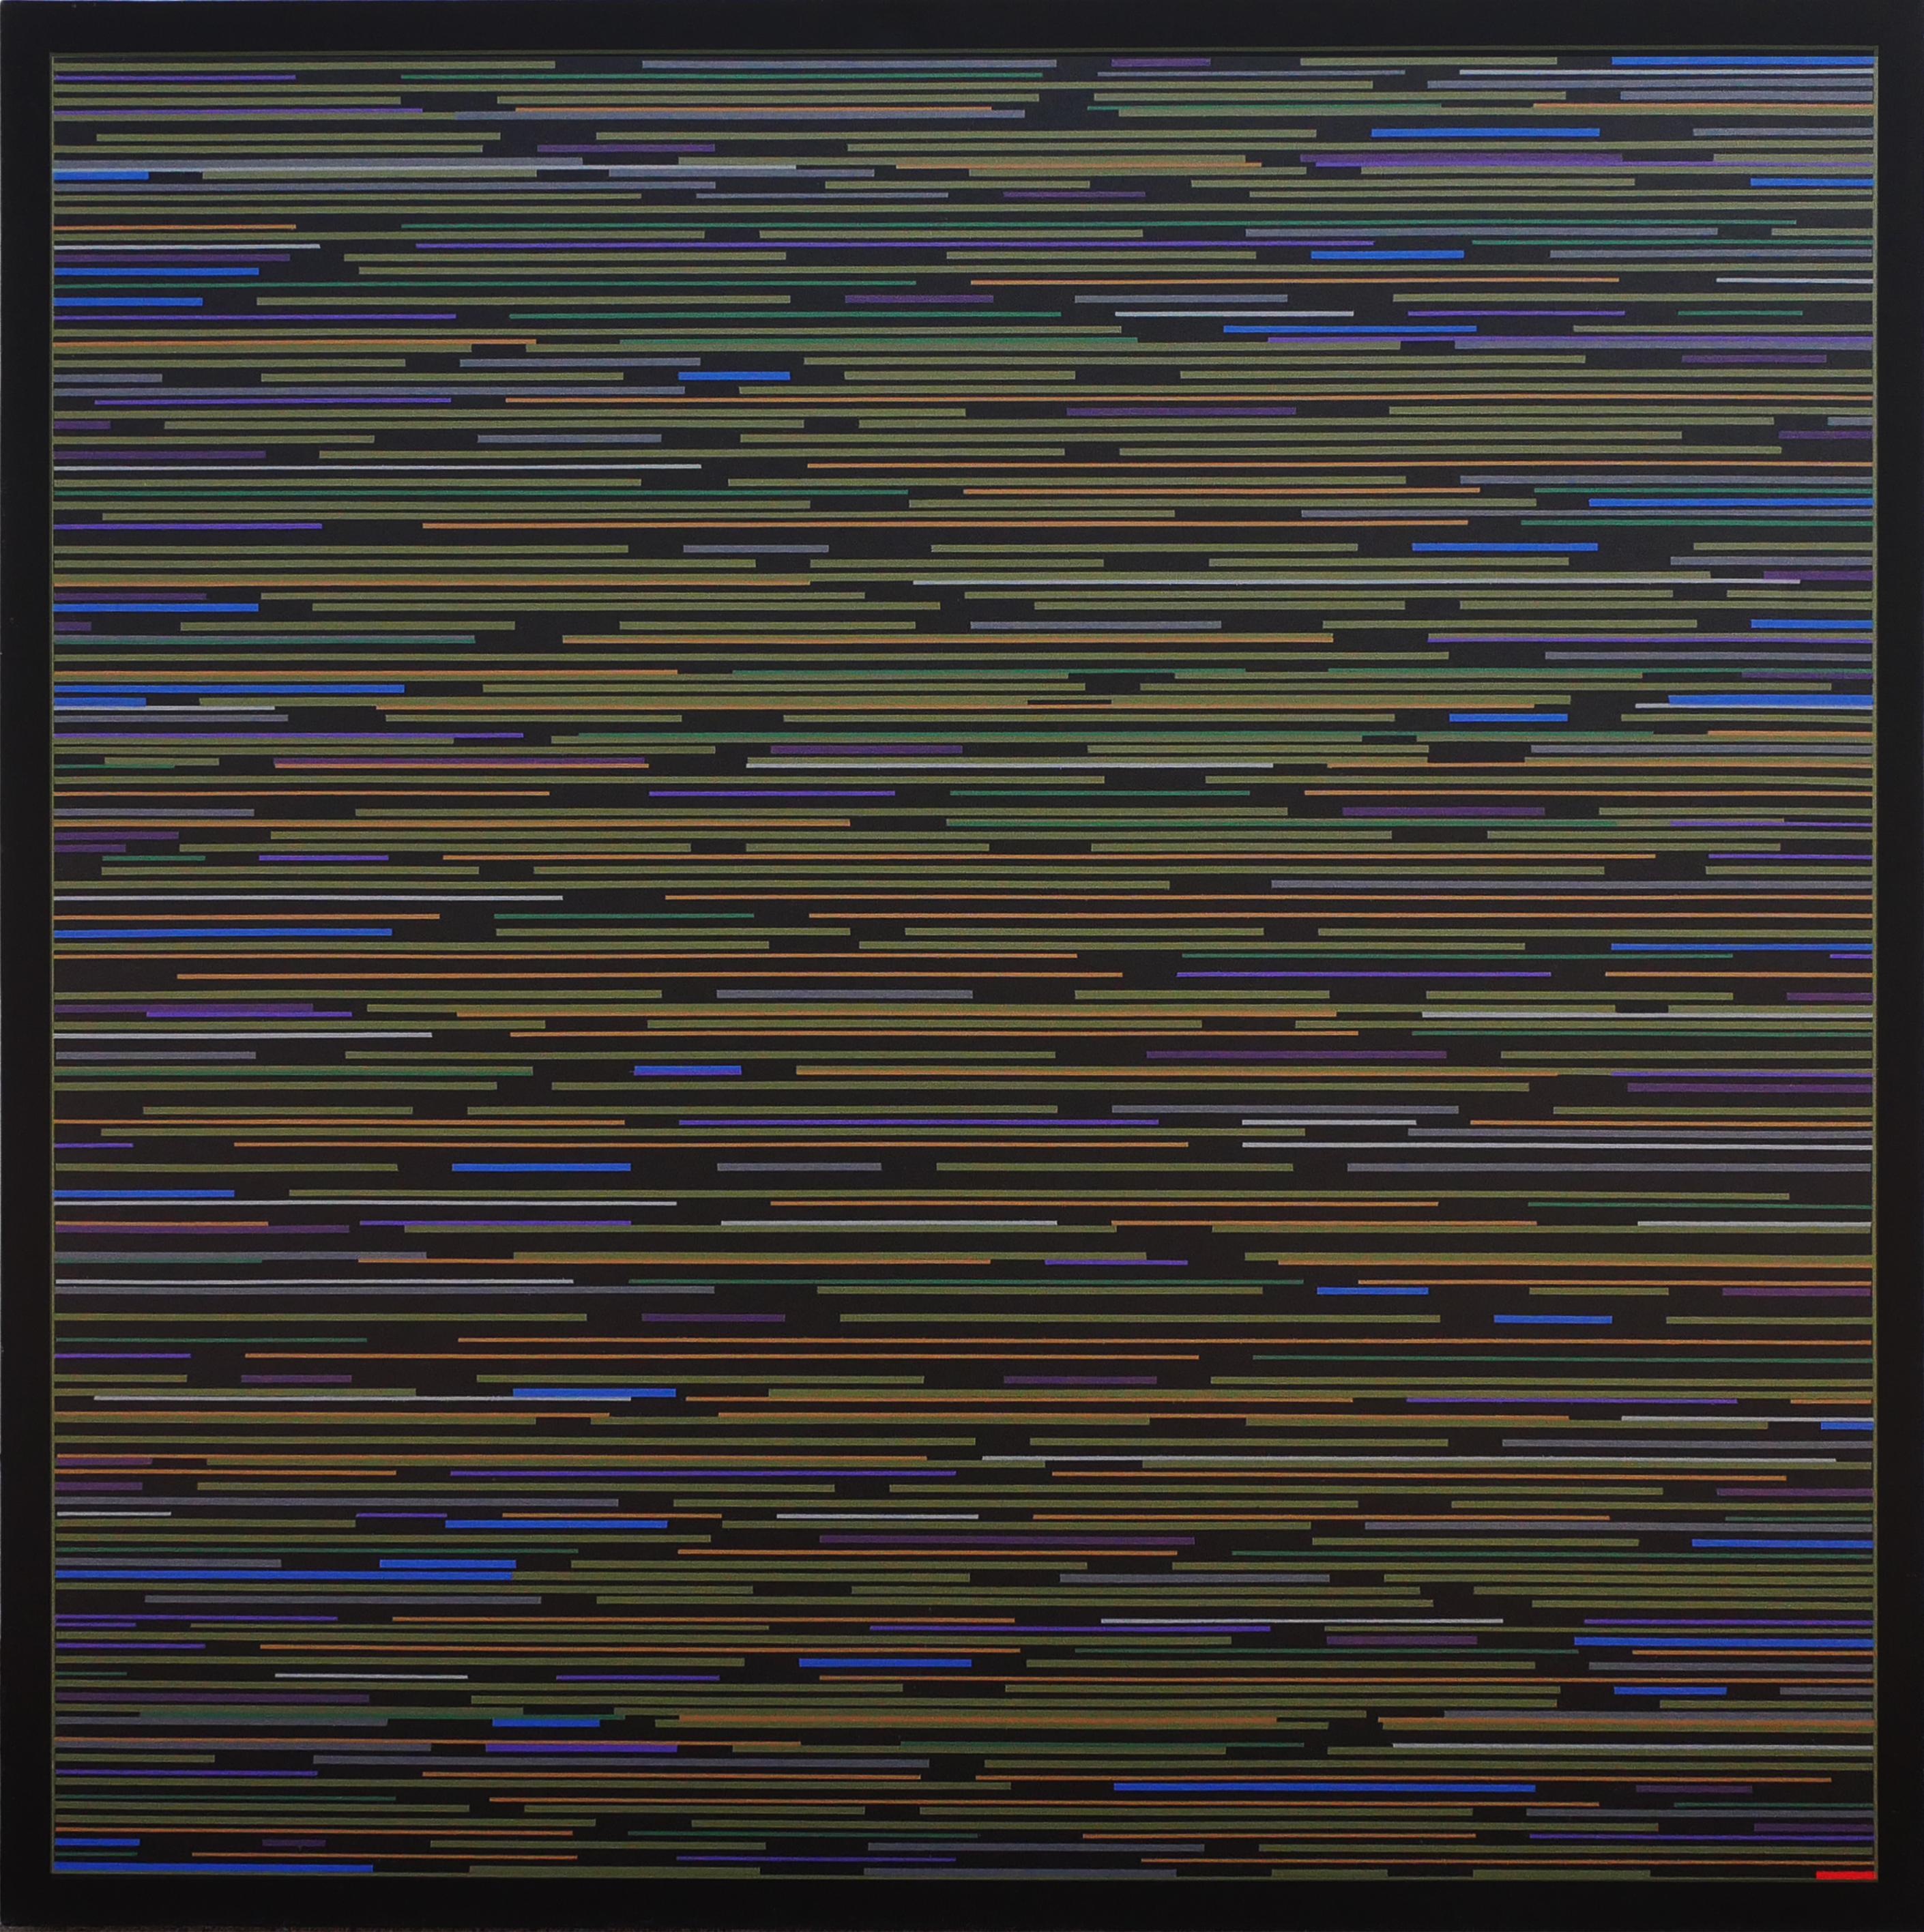 Contemporary abstract geometric painting by artist Mark Byckowski. The work is featured in a series of paintings. The work features horizontal lines with a variety of vivid colors of green, yellow, and blue, painted on a black background. Each work